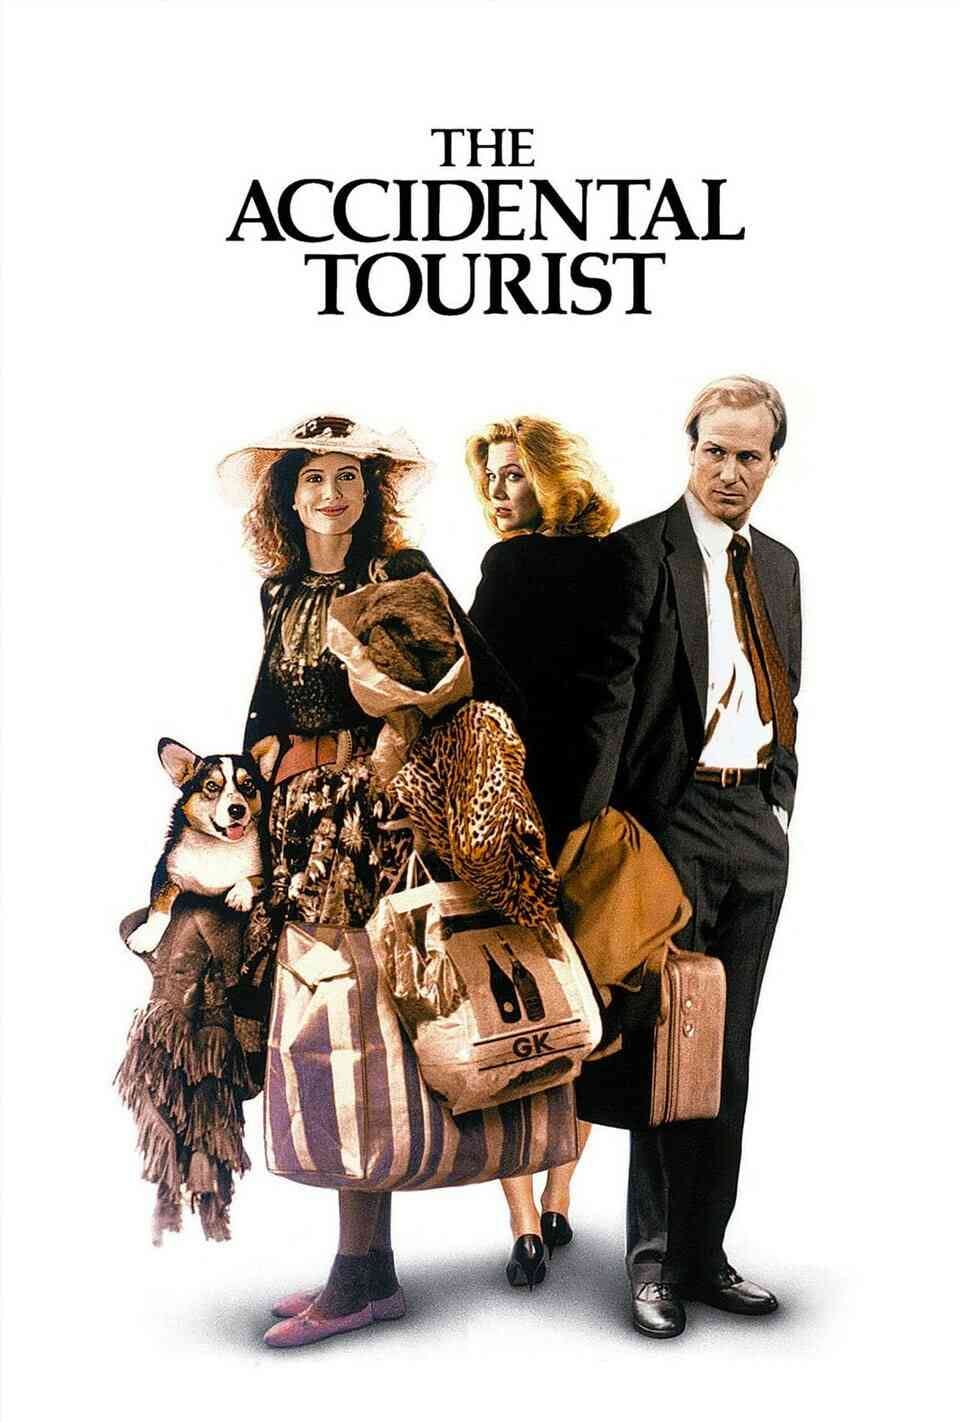 Read The Accidental Tourist screenplay (poster)